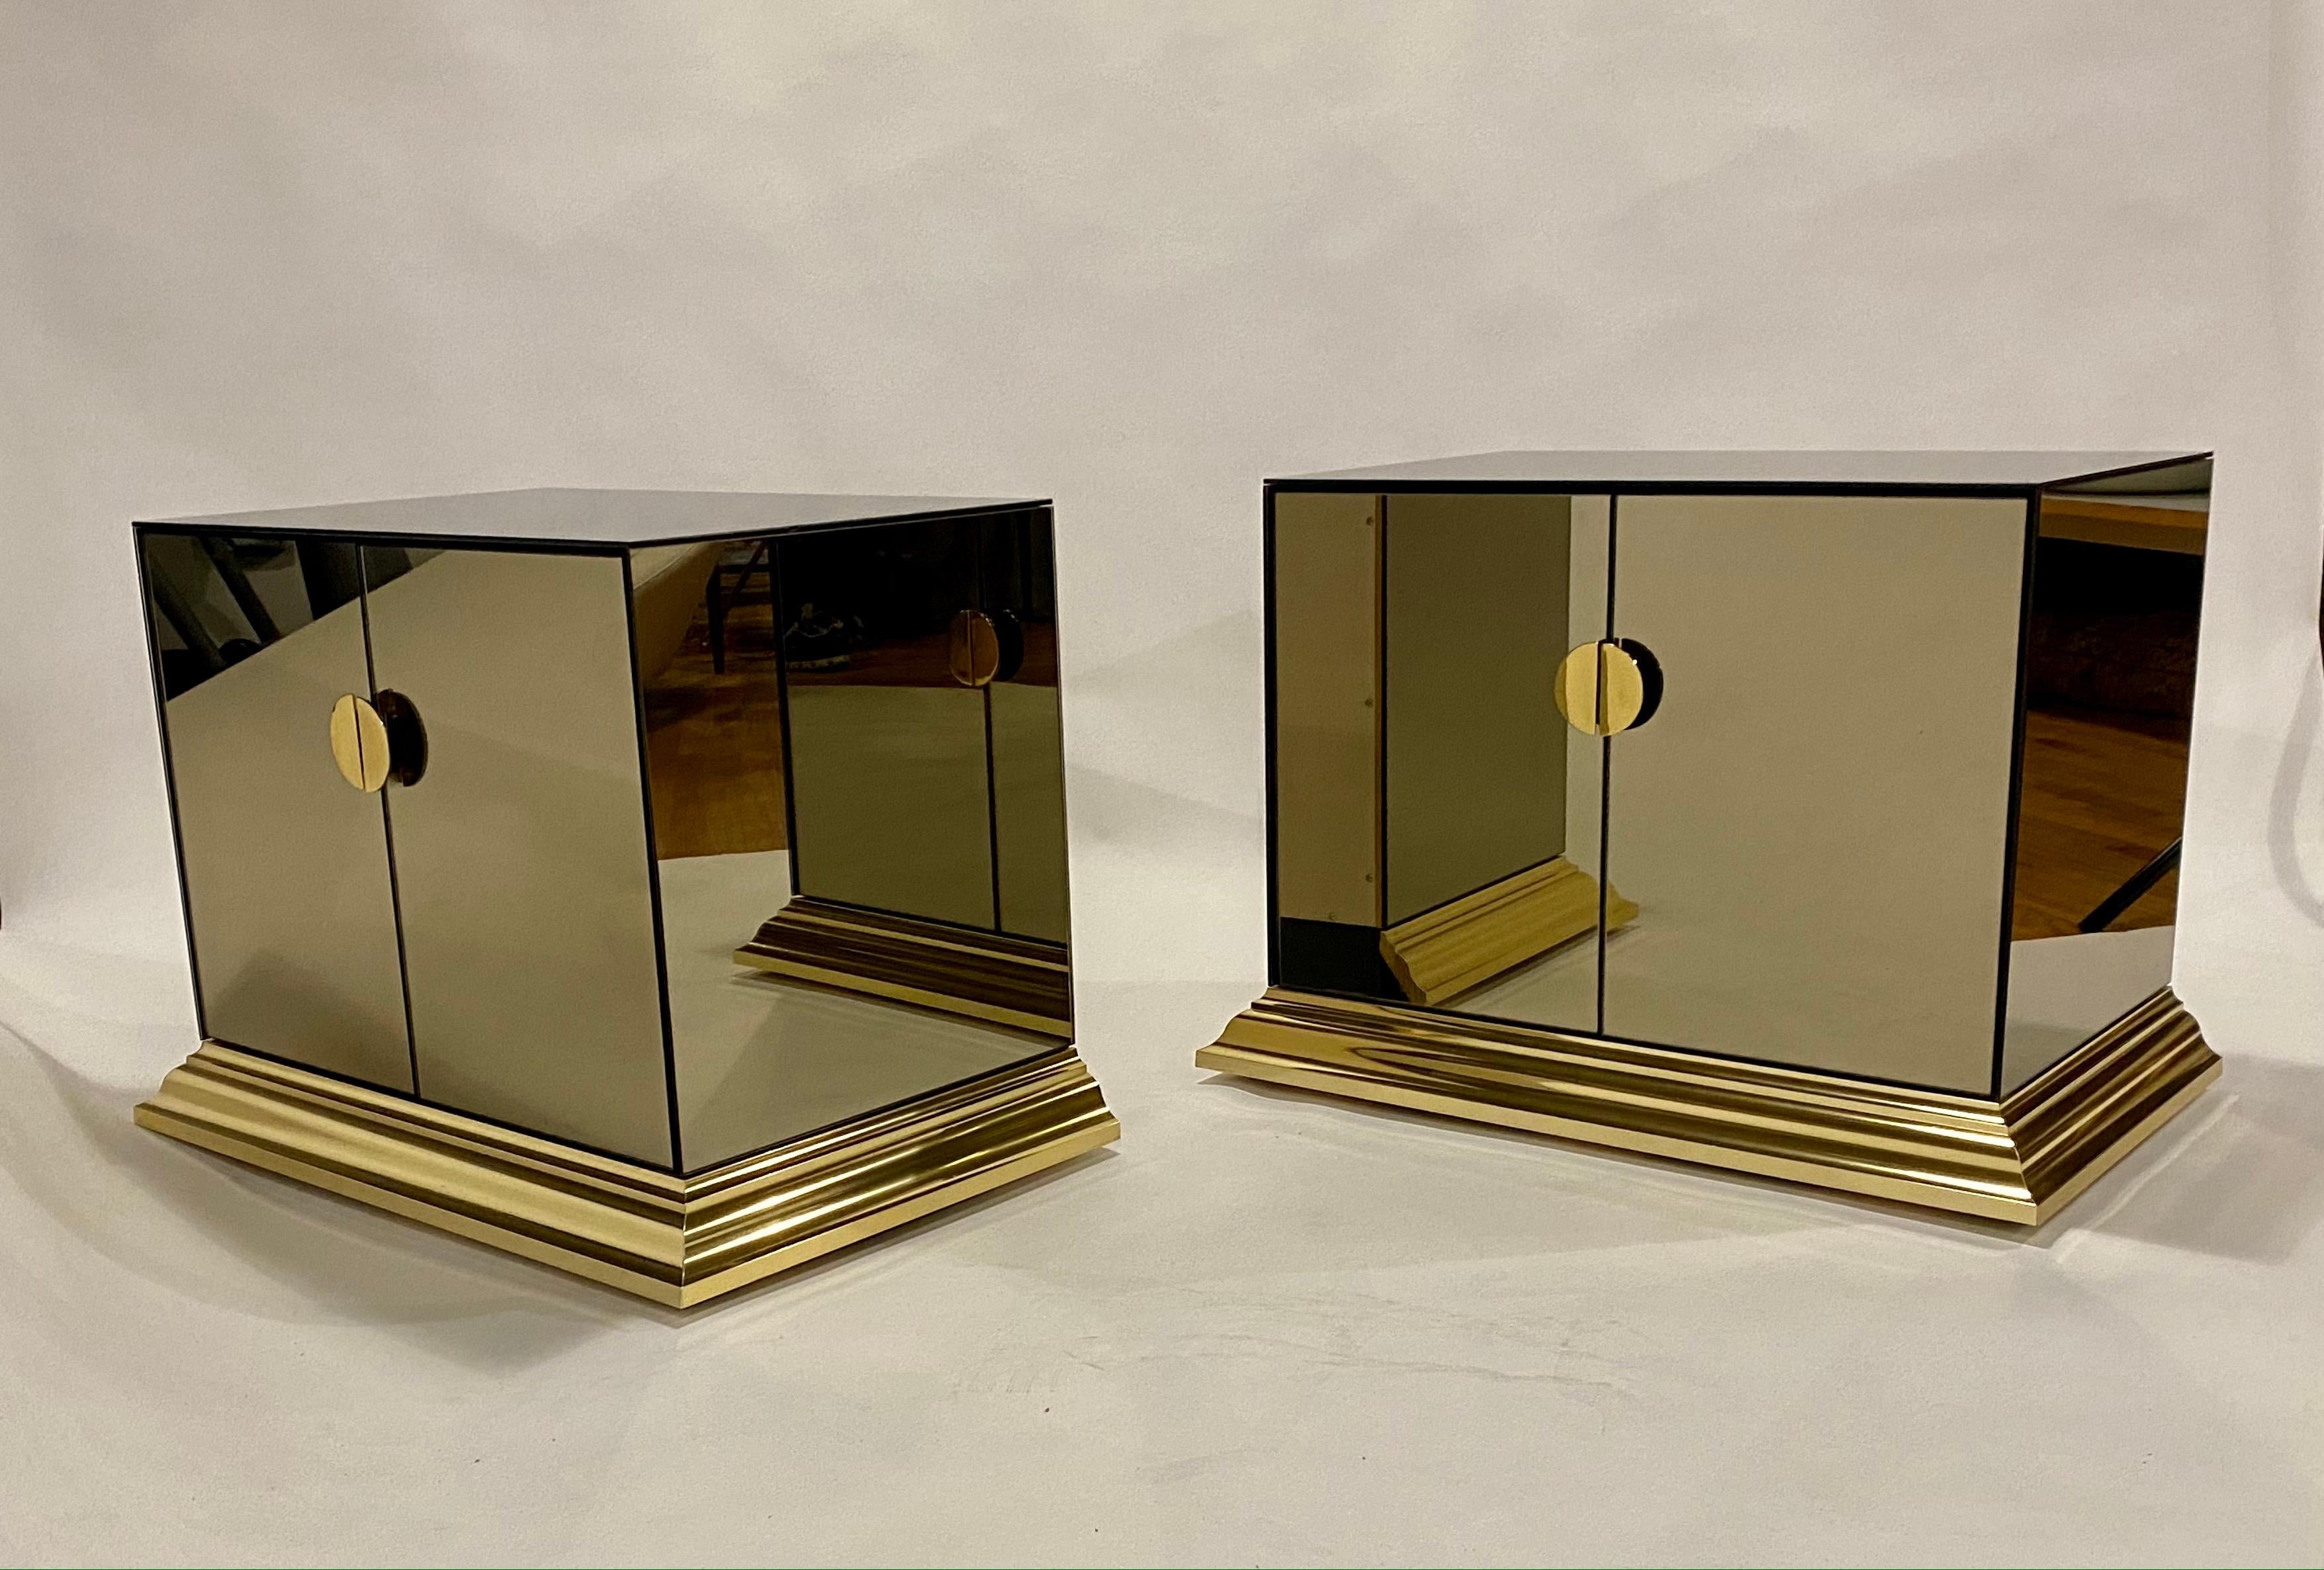 Mirrored Cabinets / Nightstands by O.B Solie for Ello In Good Condition For Sale In Chicago, IL